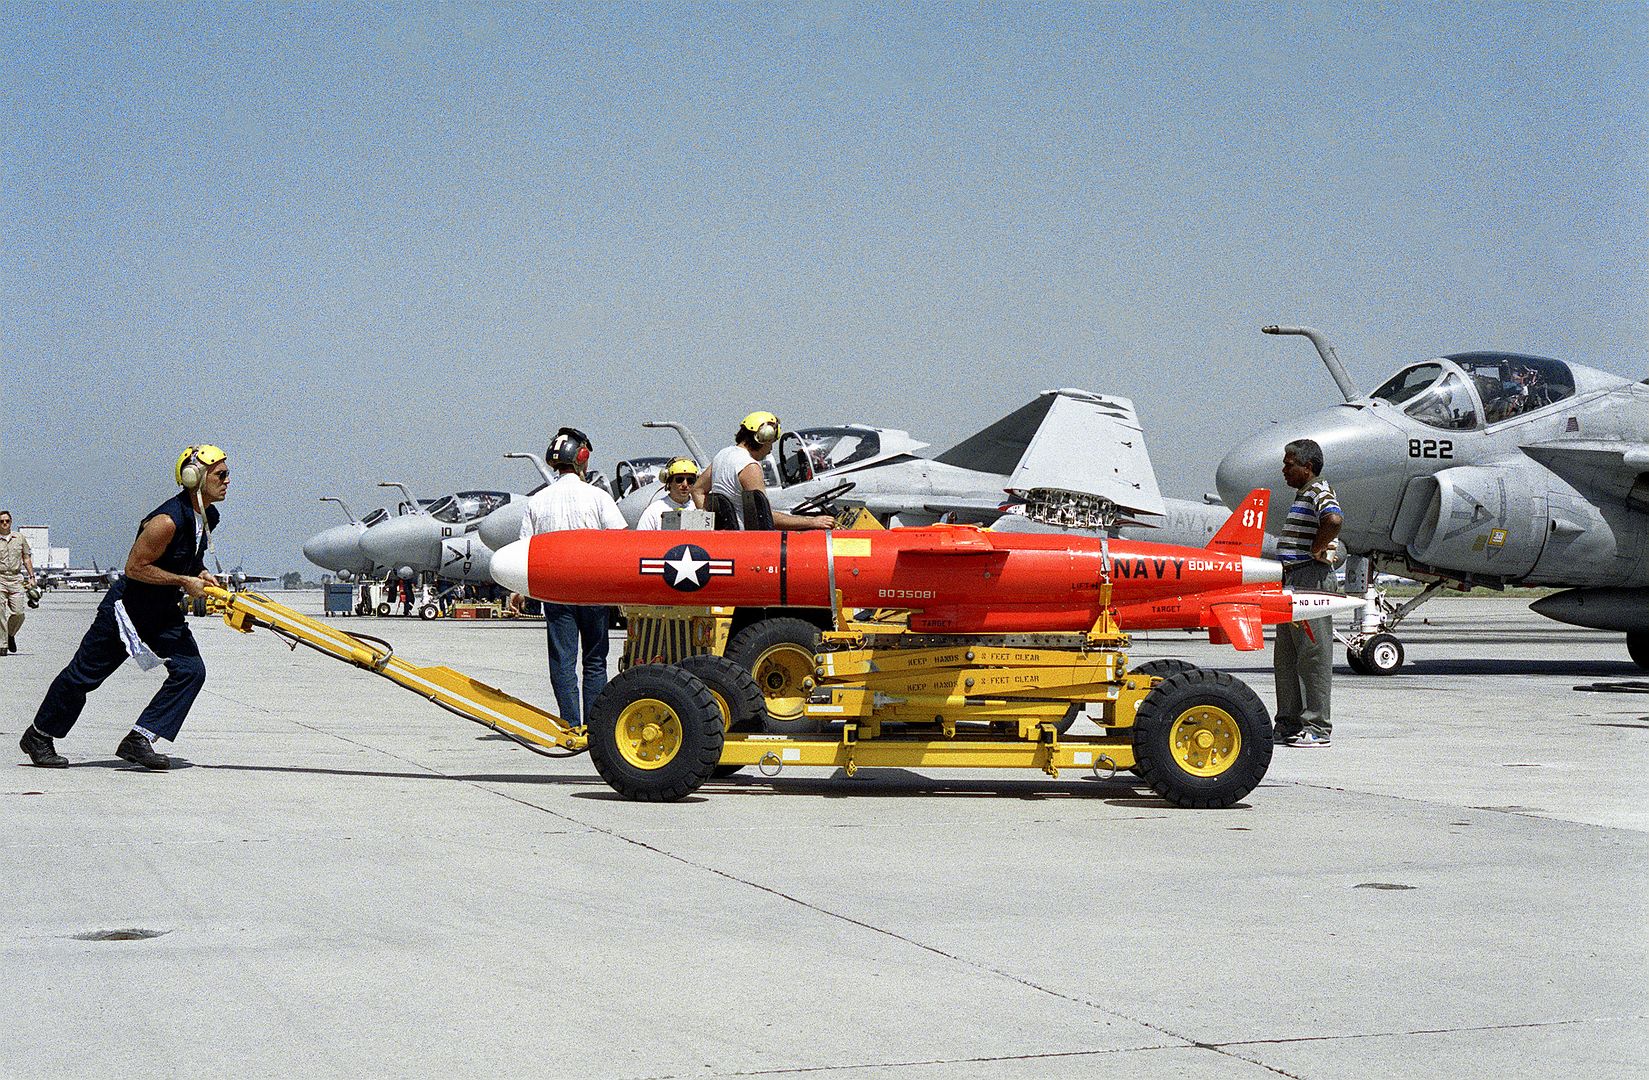 BQM 74E Target Drone To An Attack Squadron 128 A 6E Intruder Aircraft During Operational Test And Evaluation Exercises Conducted By The Missile Targets Division Of The Naval Air Warfare Center Weapons Division 1